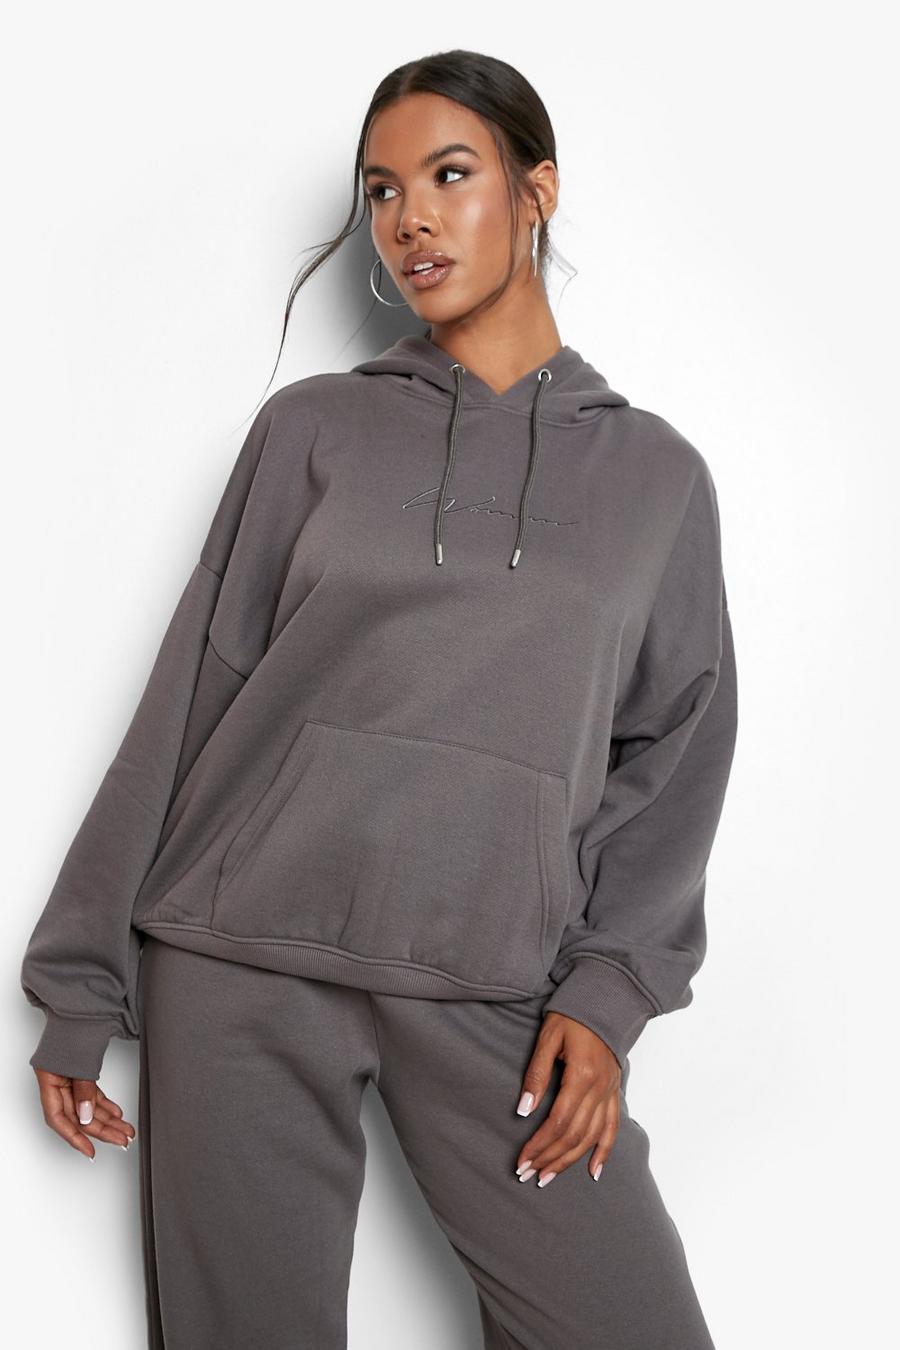 Charcoal grey Recycled Woman Embroidered Hoodie